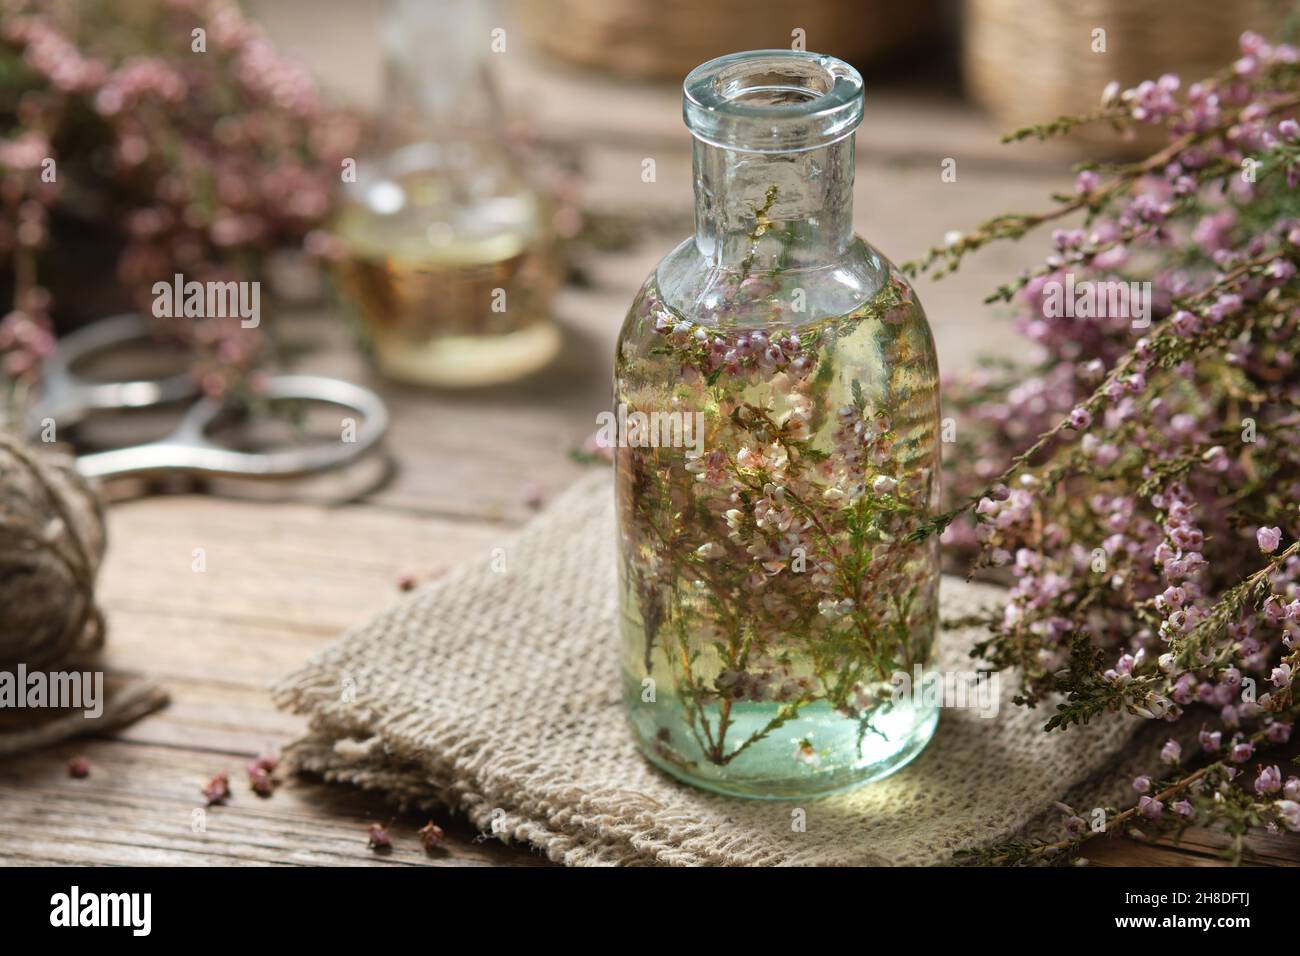 Bottle of heather essential oil or infusion, bunch of Calluna vulgaris flowers on background. Alternative herbal medicine. Stock Photo